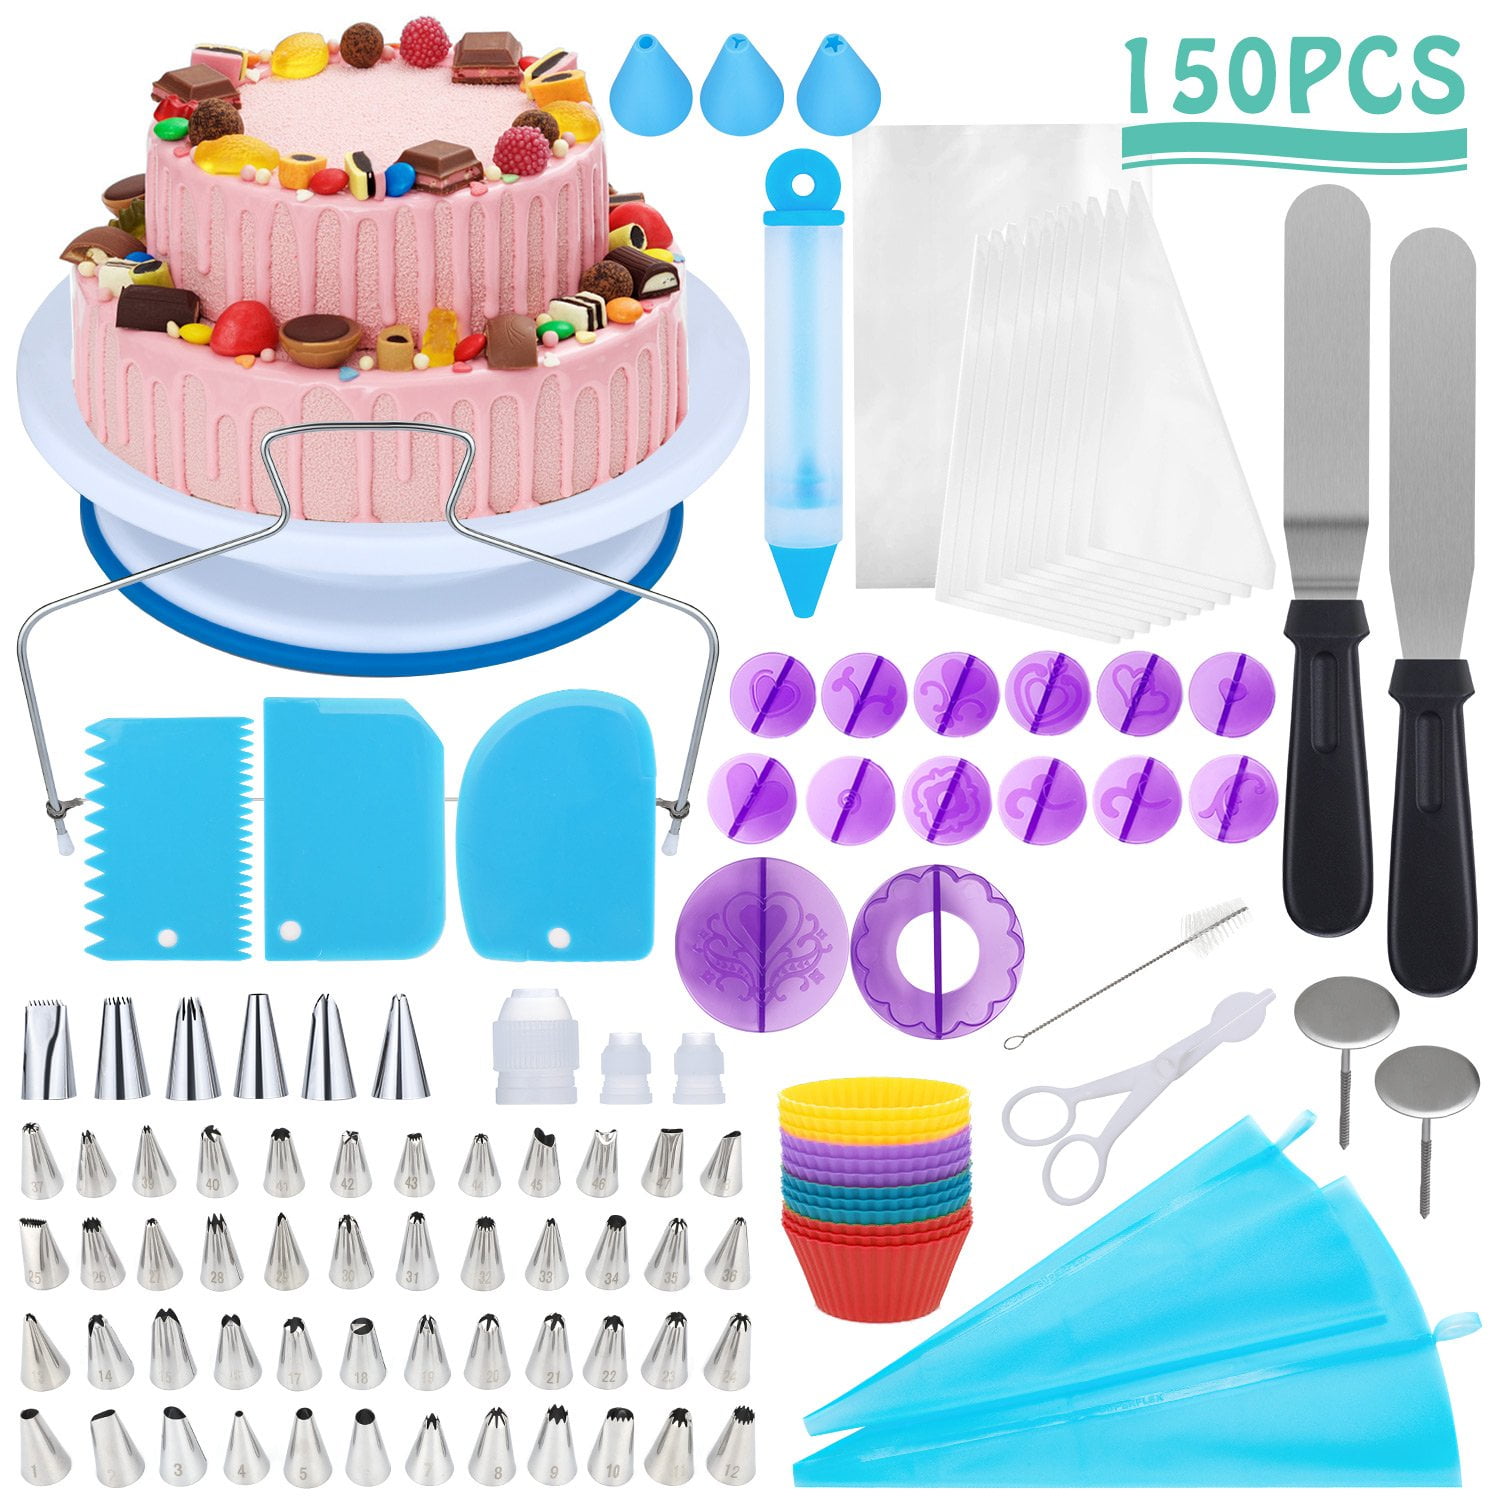 Cupcake molds 150pcs Cake Decorating Supplies Set Cupcake Decorating Kit Baking Equipment Rotating Turntable Stand DIY Baking Tools Cake Scrapers Icing Spatula Piping Nozzles and Bags 